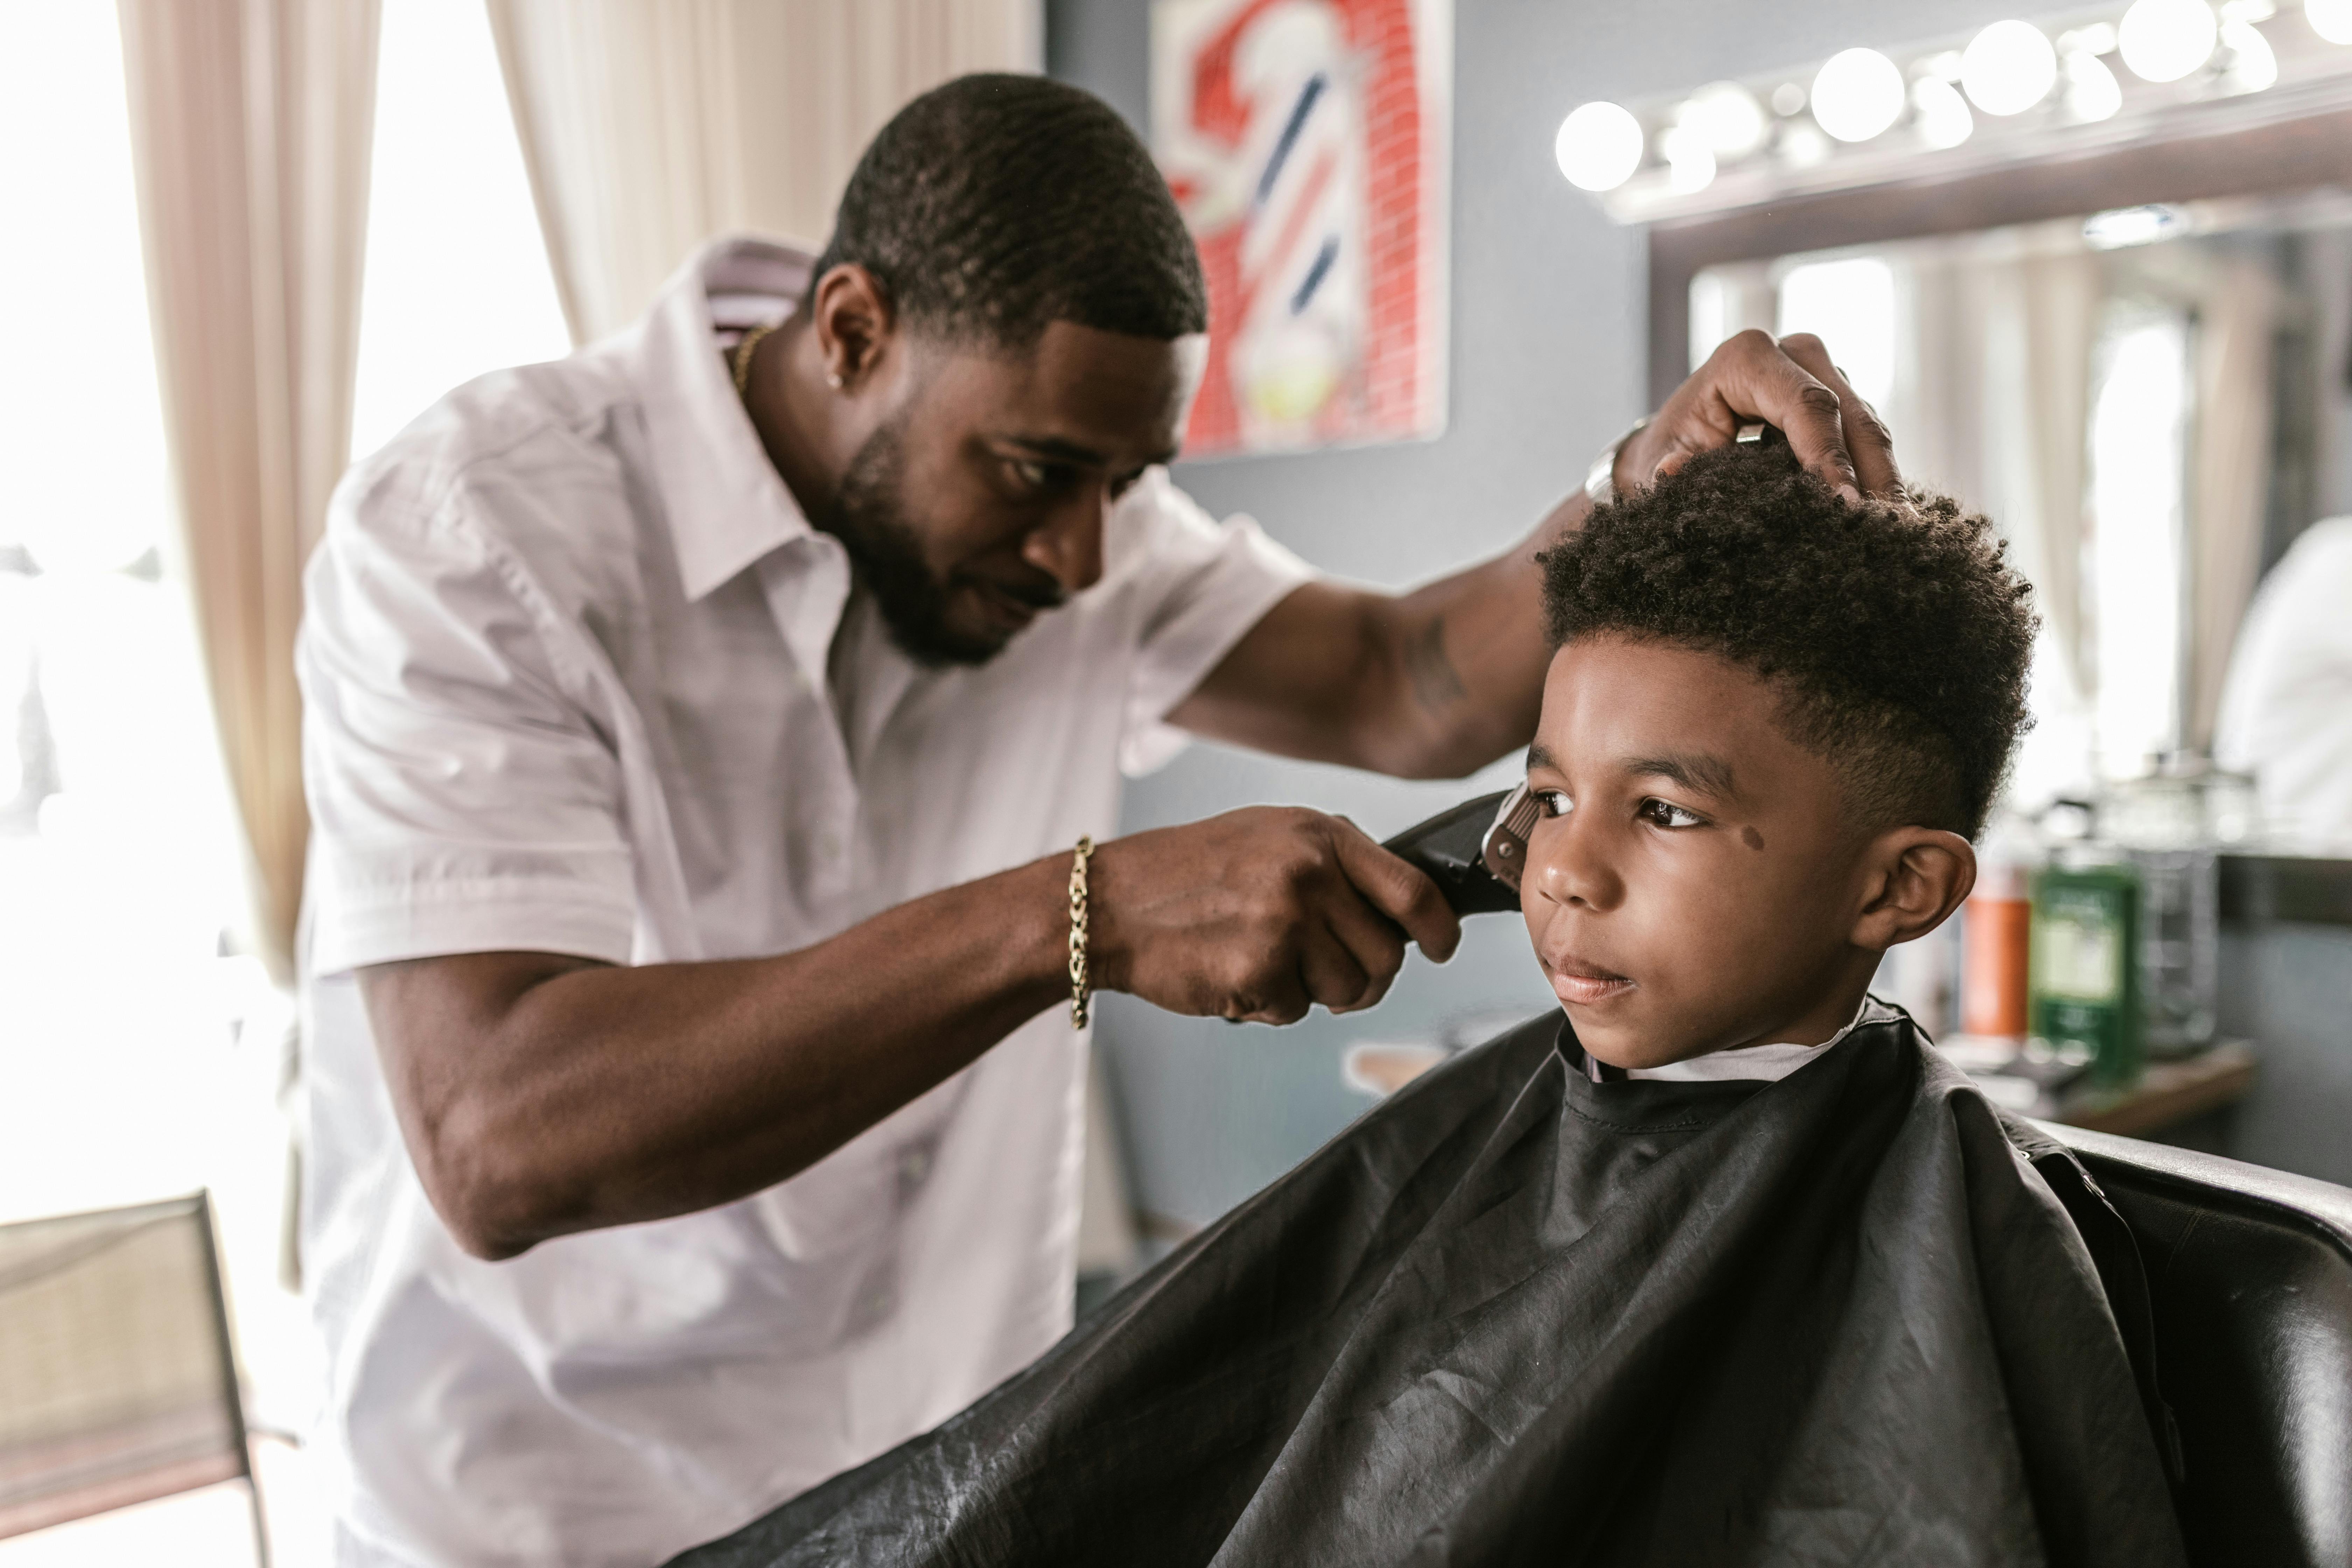 Man helps child sit in barber shop png download - 1864*2724 - Free